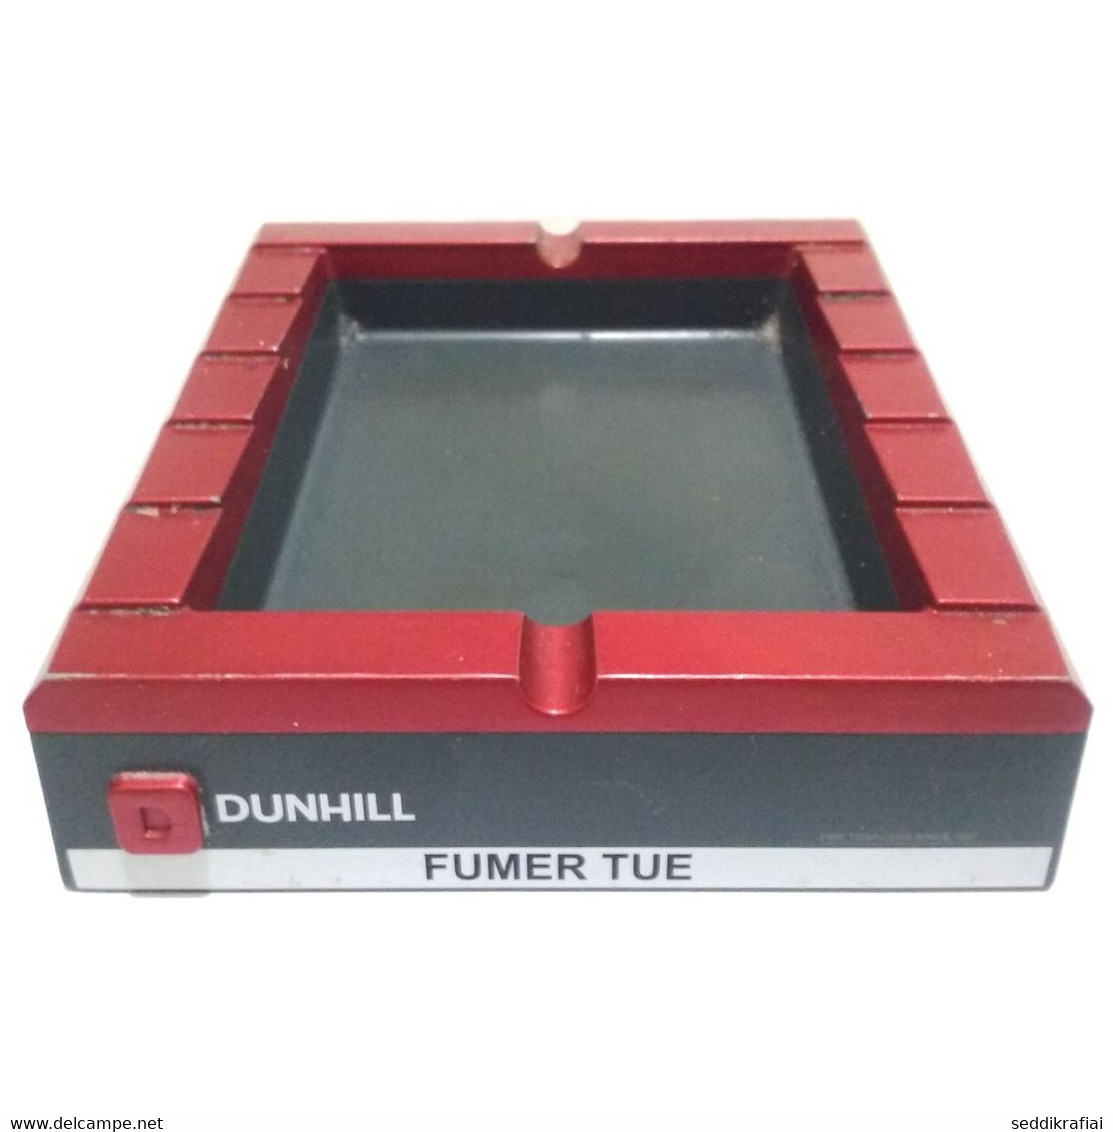 Ashtray Dunhill Tobacco Cigar Alfred Dunhill Fin Tabaccos Since 1907s Cigarettes - Metal